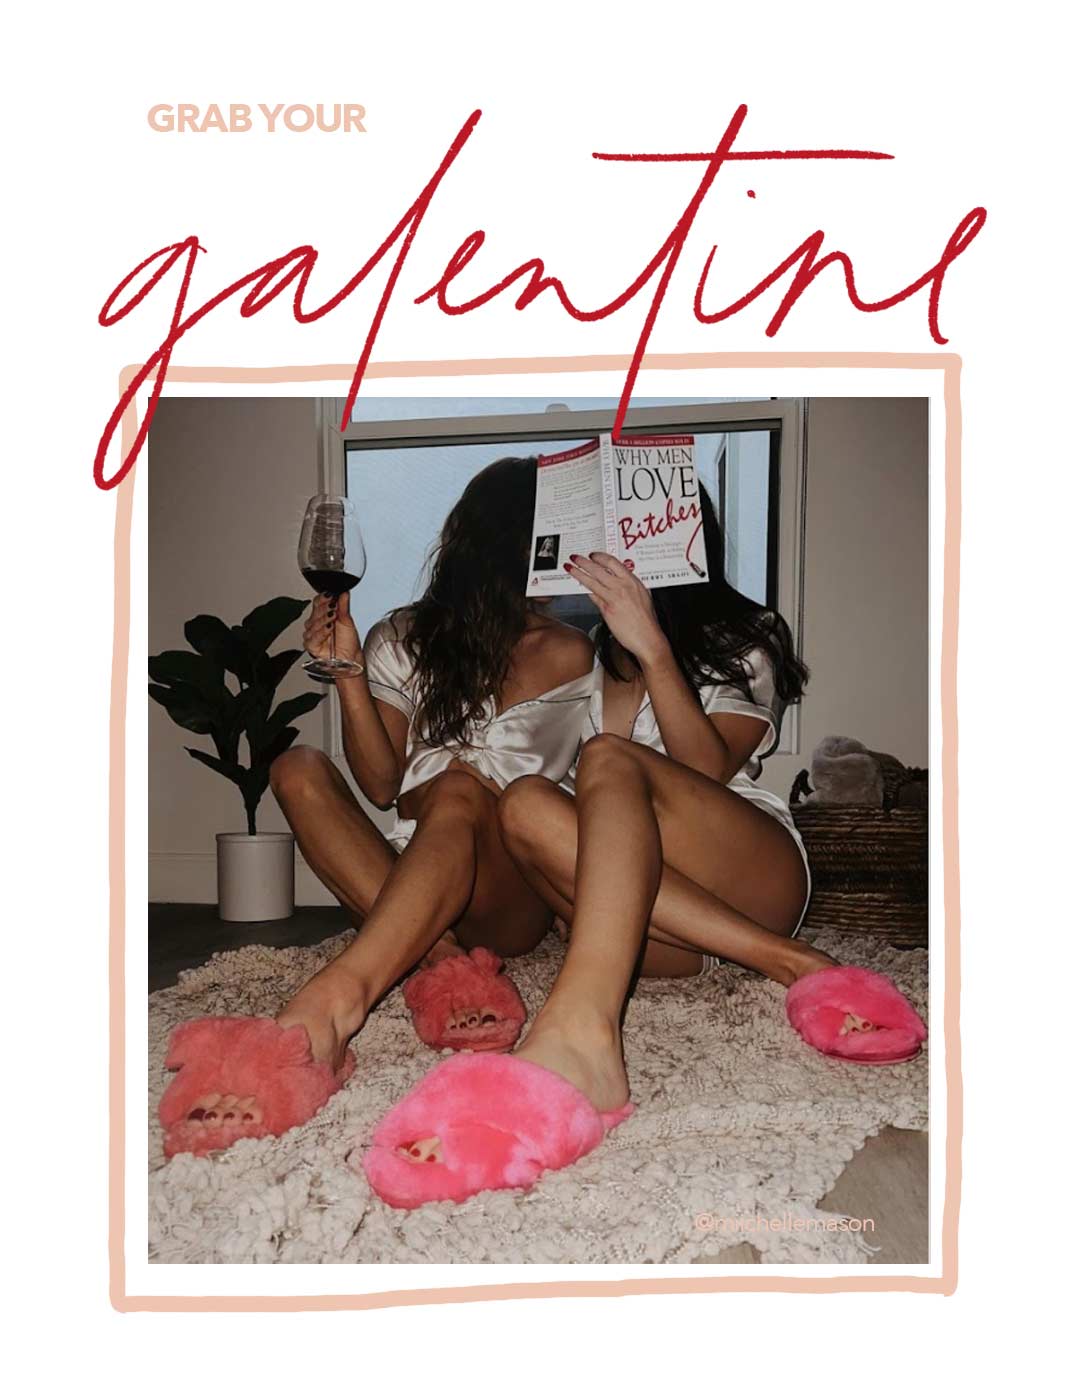 'Grab Your Galentine' two girls drinking red wine and laughing wearing bright pink sheepskin slippers